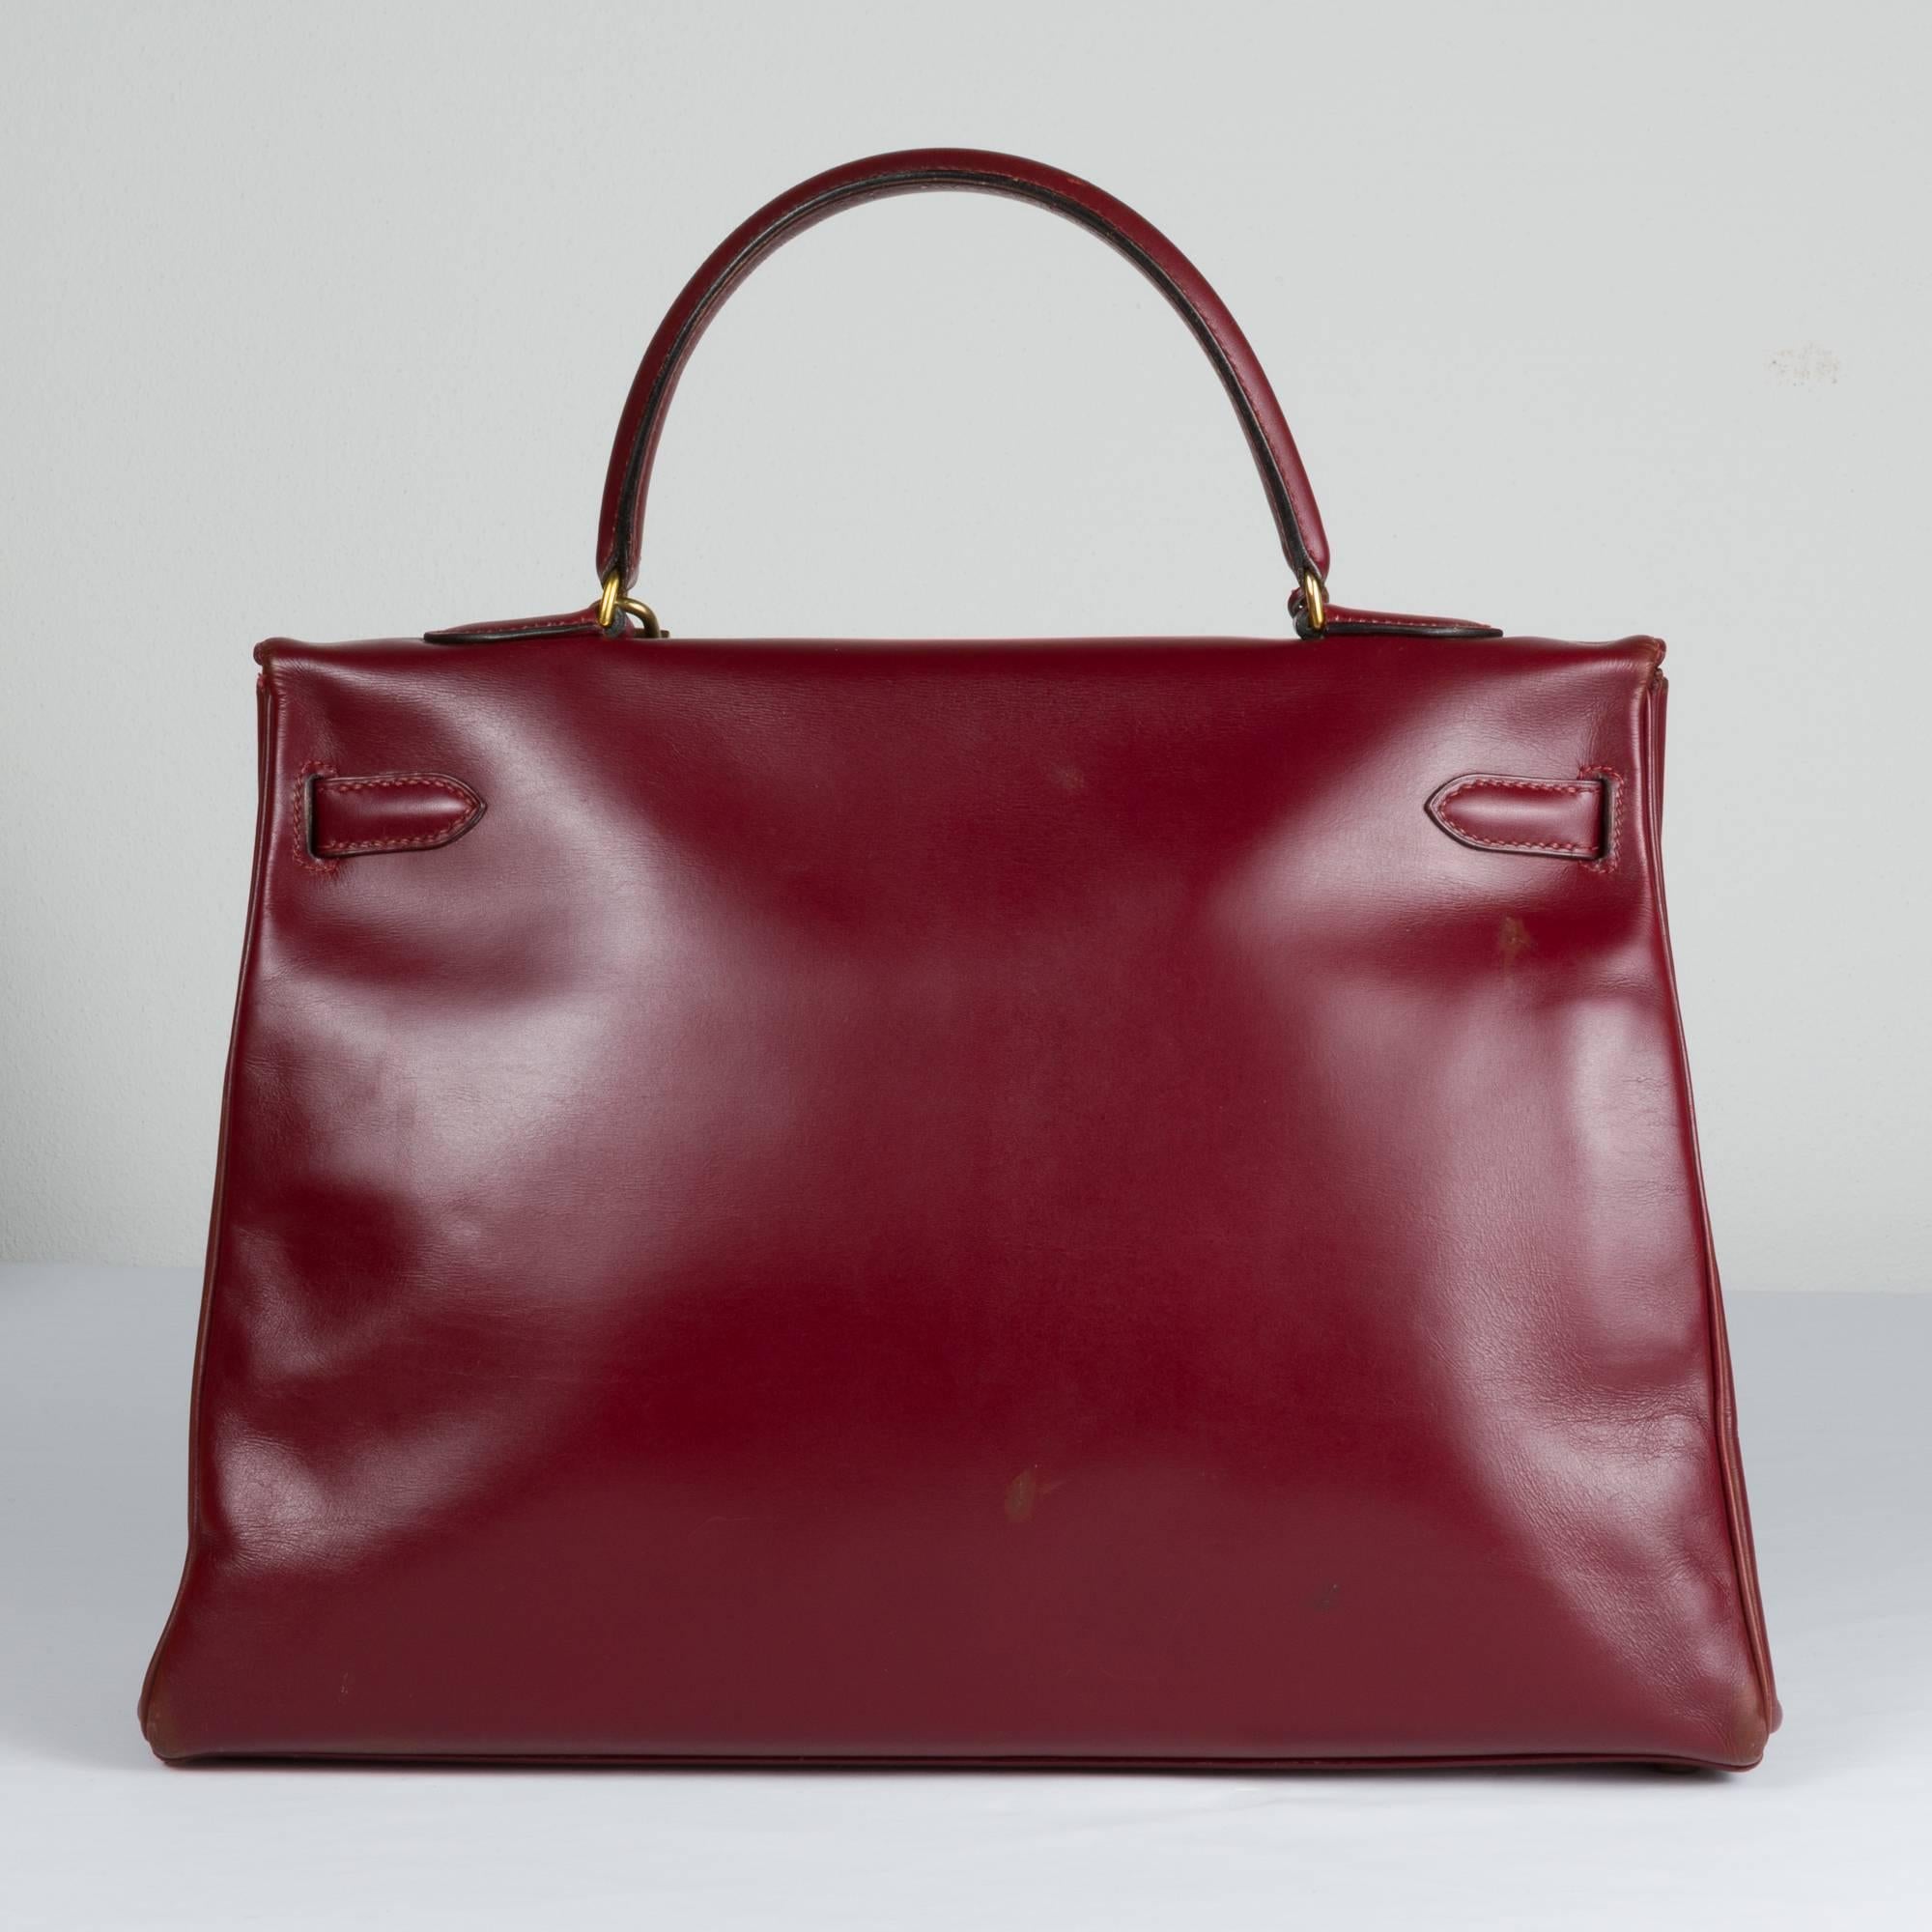 Kelly Hermes in box leather bordeaux.
Golden hardwares.
Dustbag and shoulderbelt are missing, but the bag comes with its clochette, padlock and keys.
P letter in the circle, year 1960.

Good conditions. Rare signs of use shown in the pictures.
